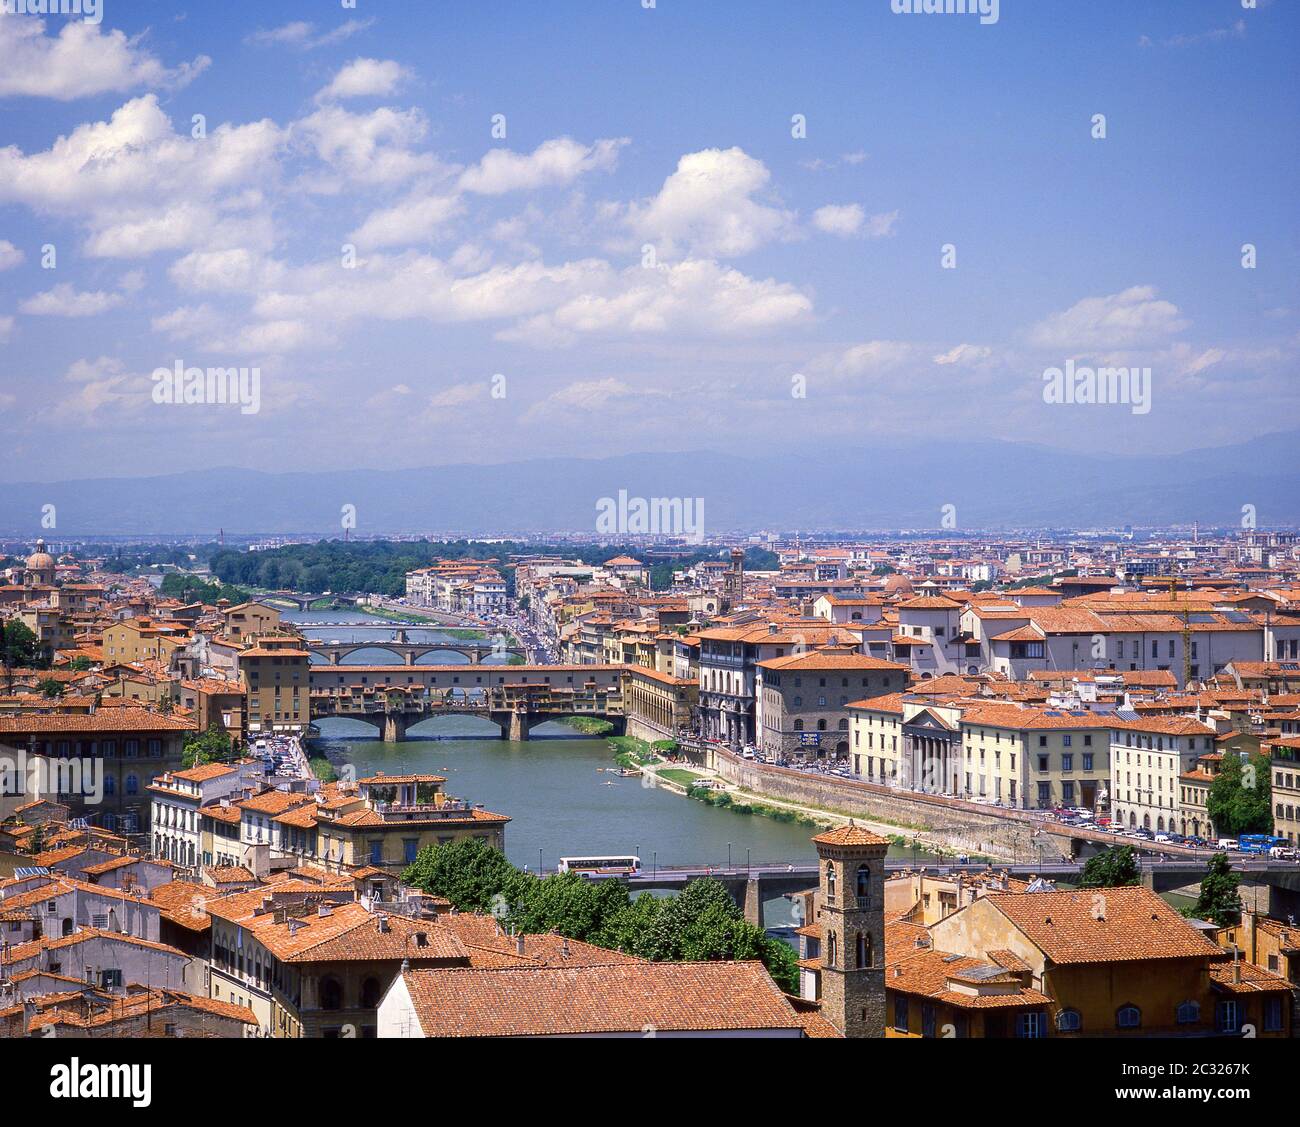 River Arno and Ponte Vecchio from Piazzale Michelangelo, Florence (Firenze), Tuscany Region, Italy Stock Photo